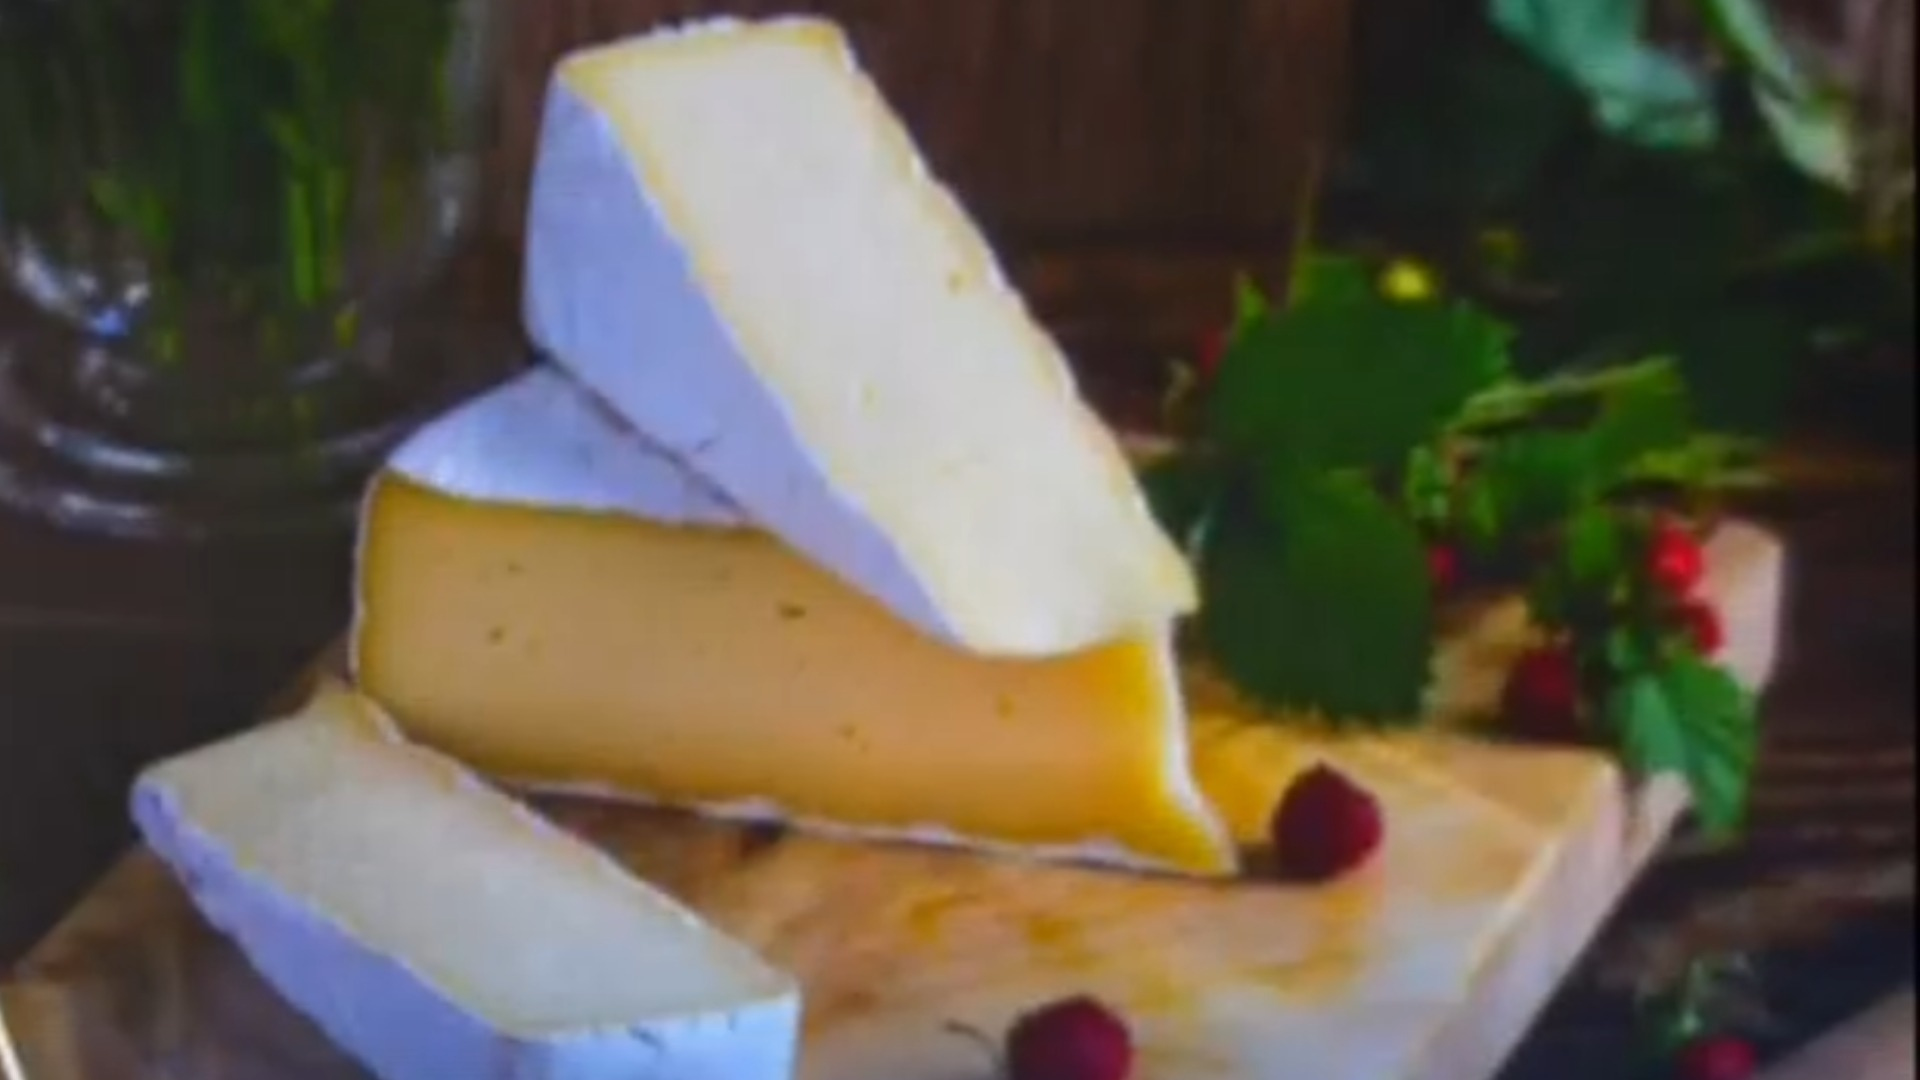 Watch Cbs Evening News Cheeses Recalled After Listeria Outbreak Full